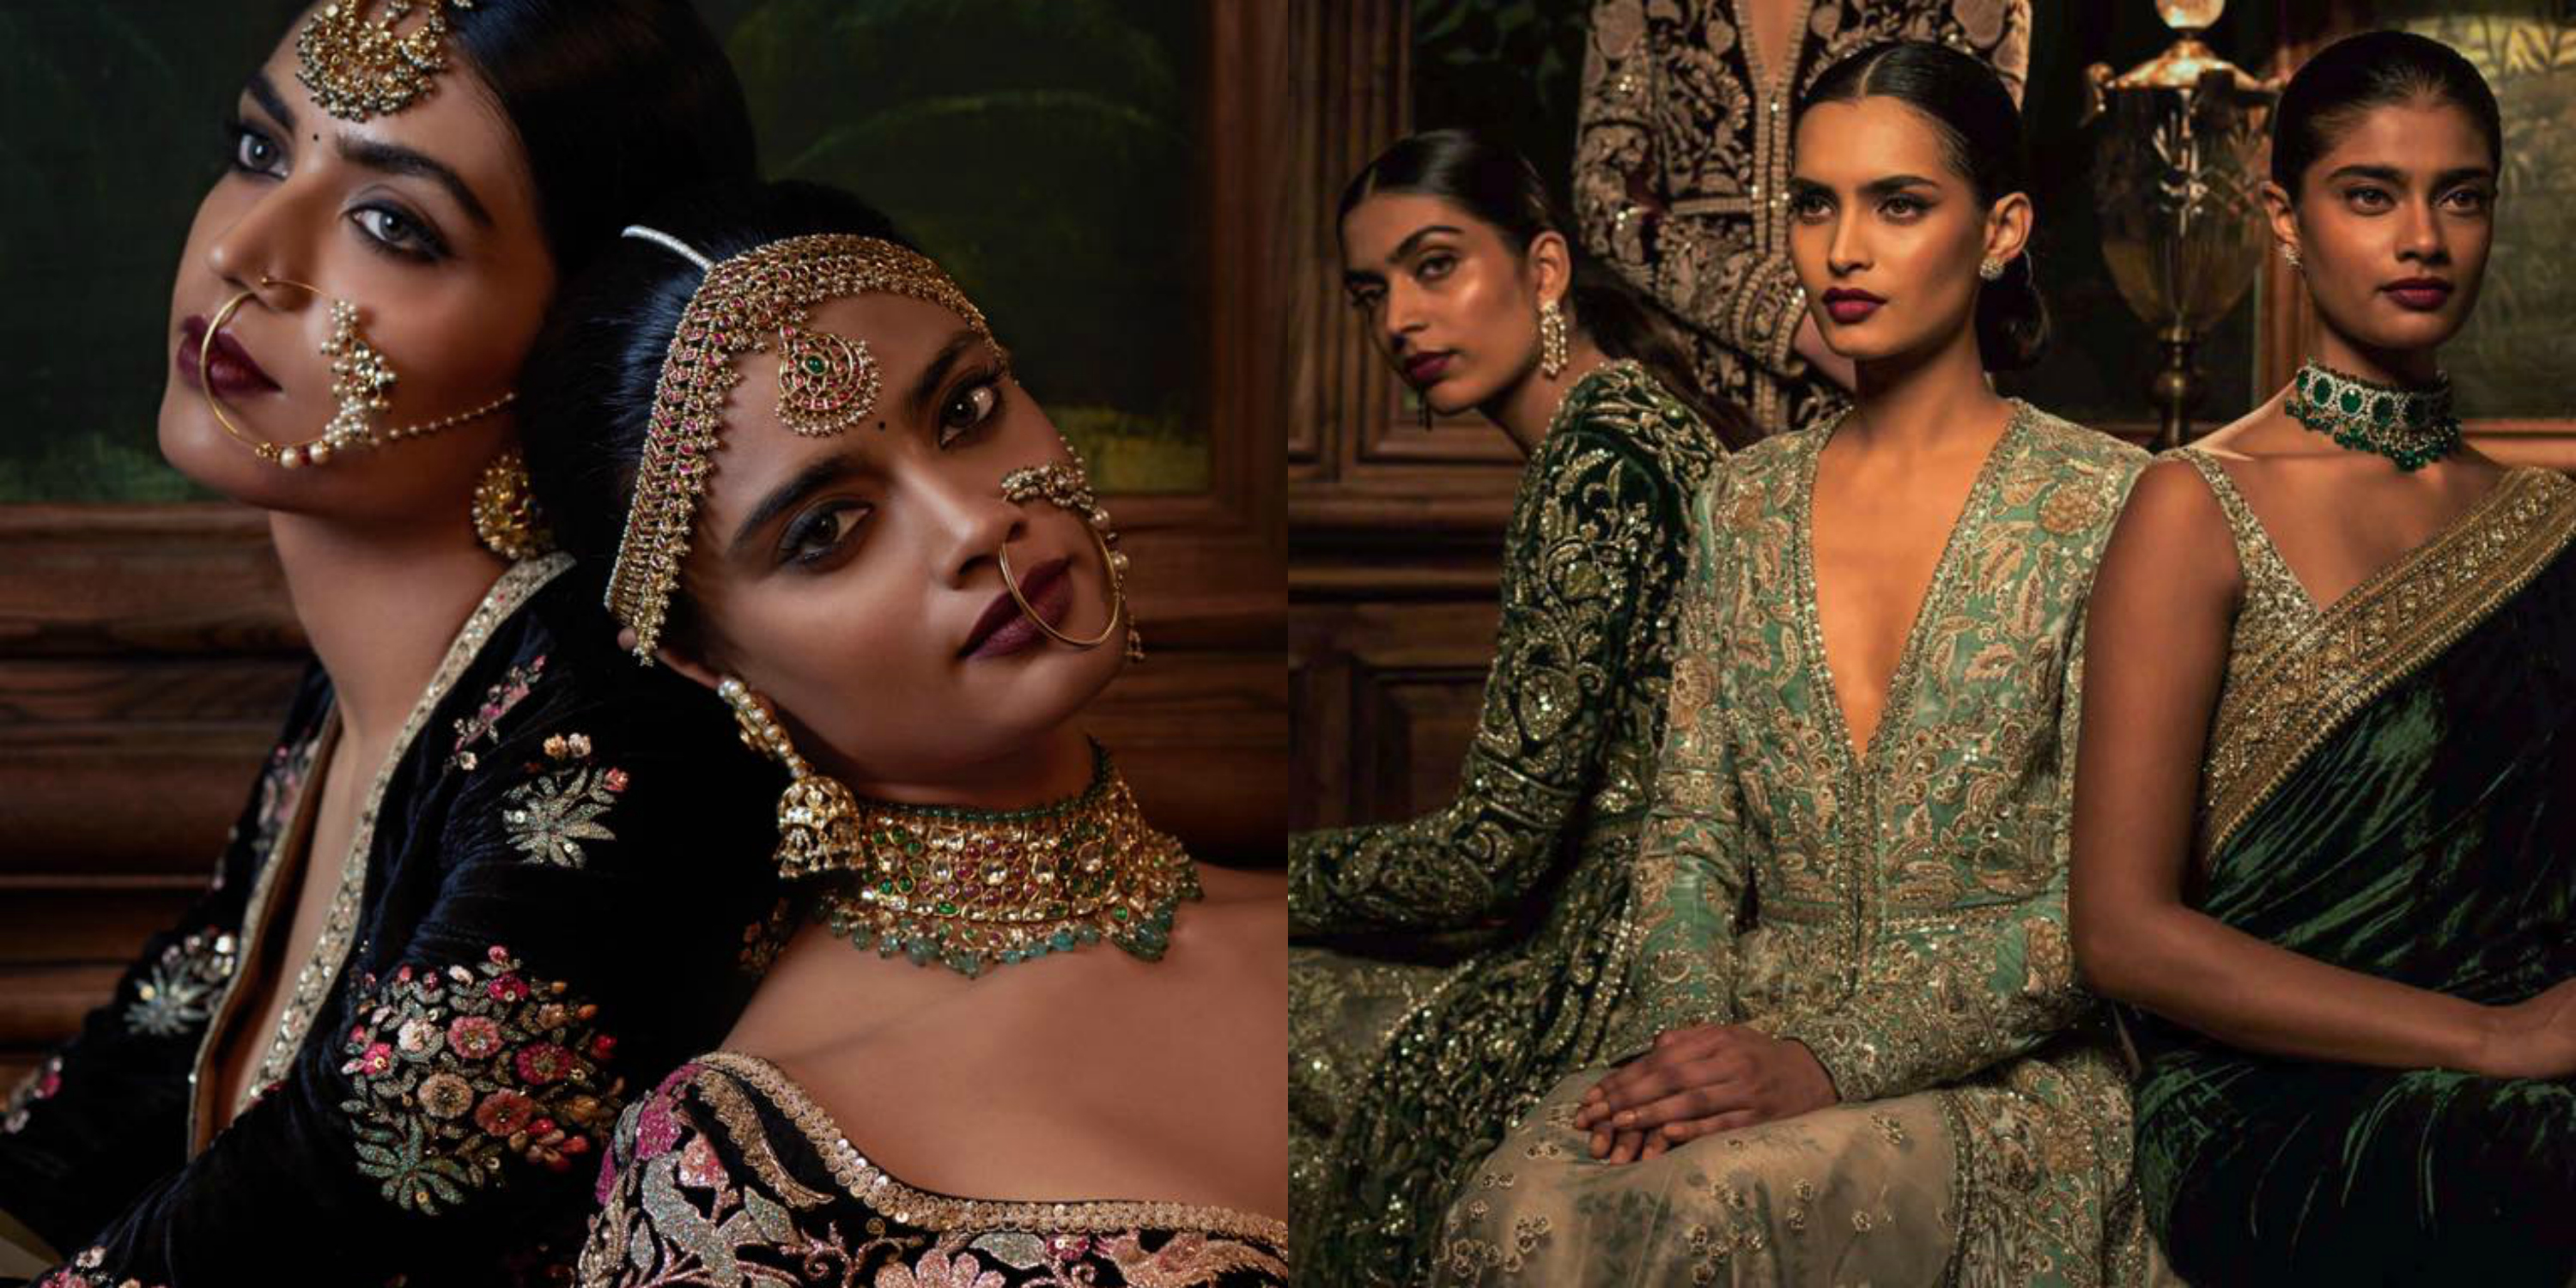 Daring To Be Dark Fighting Against Colorism In South Asian Cultures HuffPost Women image